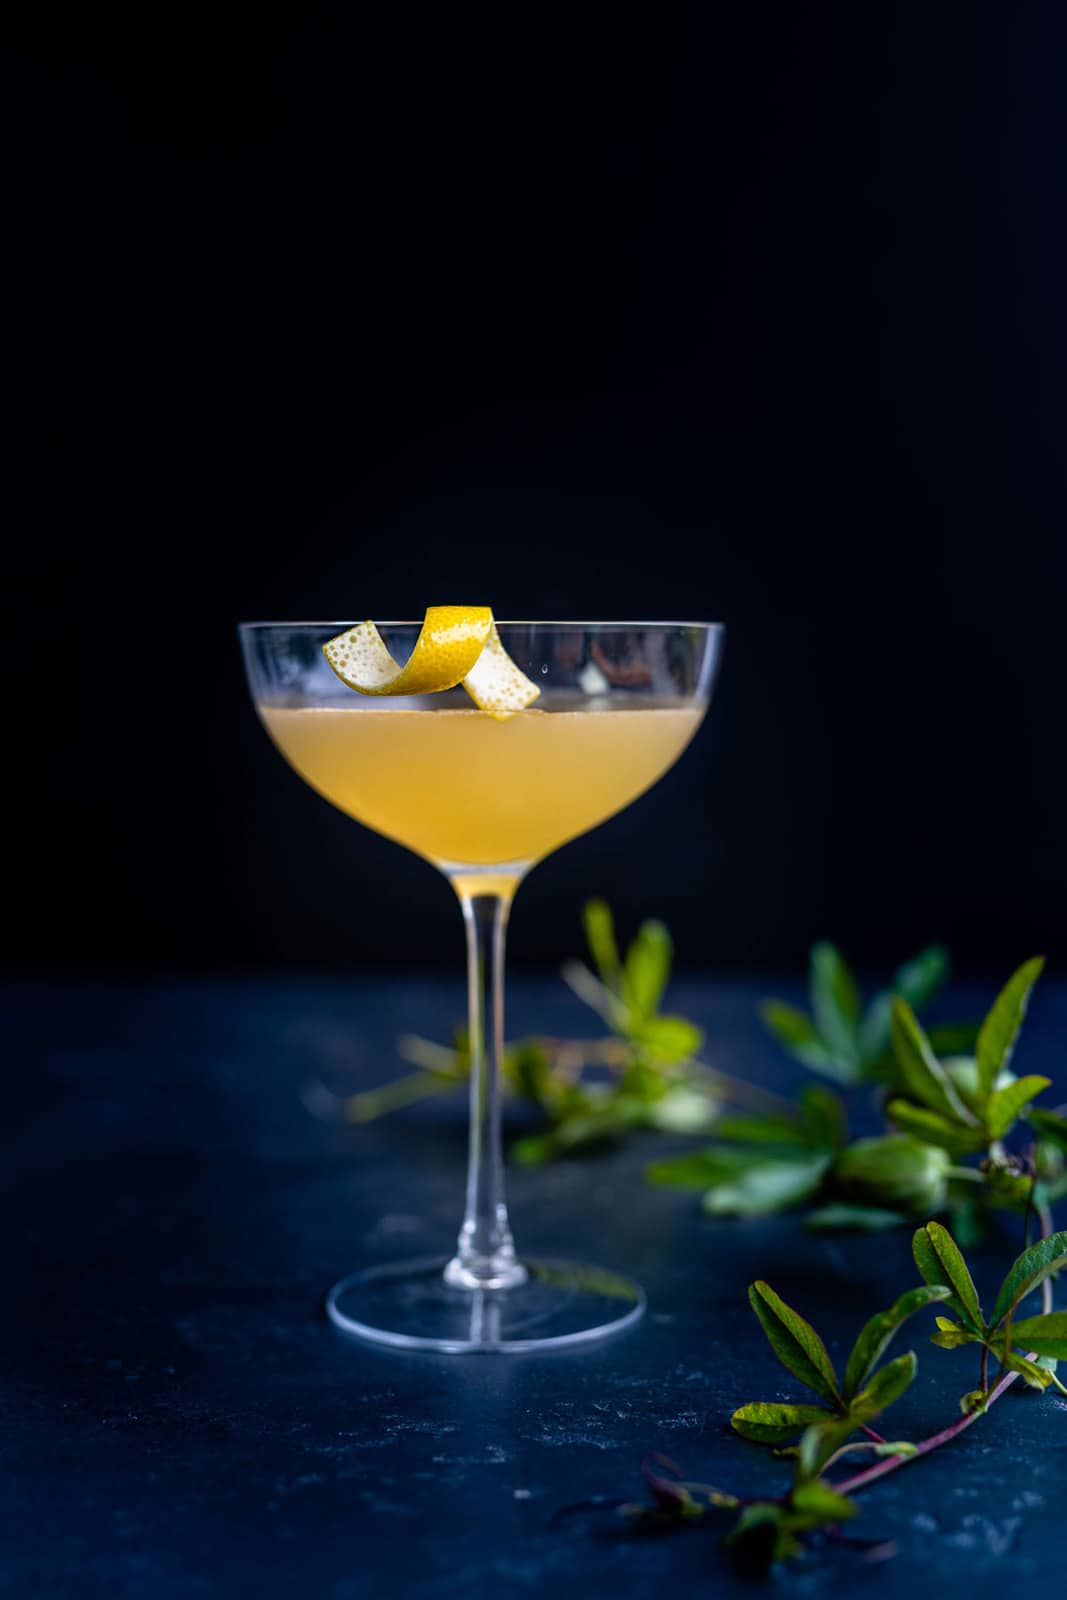 The Corpse Reviver 2 made with gin, Lillet, orange liqueur and absinthe in a cocktail glass